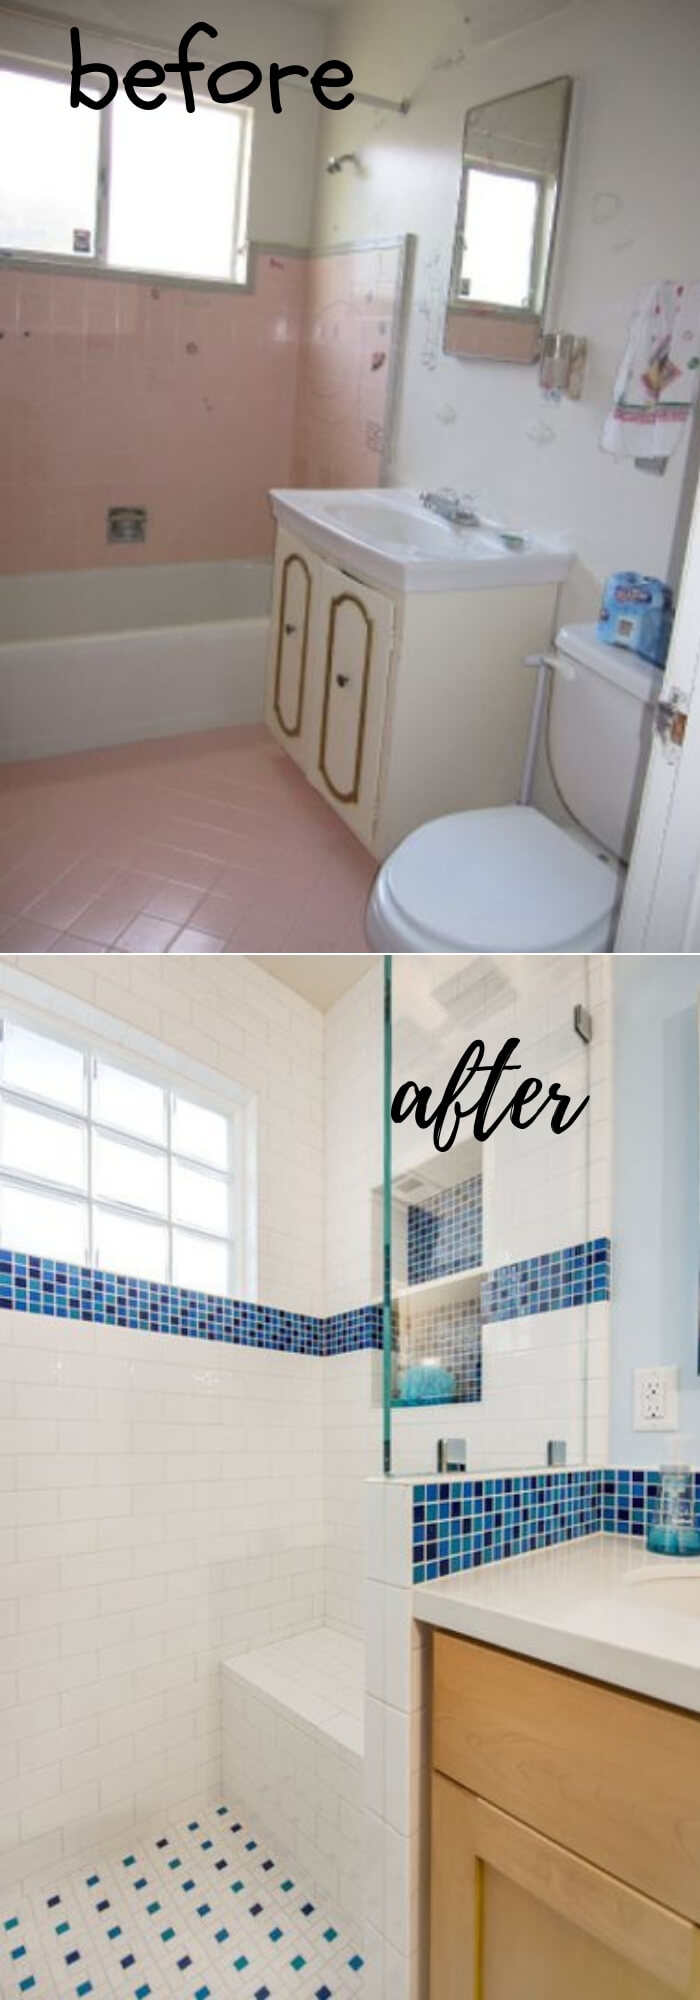 Upgrade a Small Bathroom (Glass block windows, Starphire glass shower panes and bright white and blue tile)